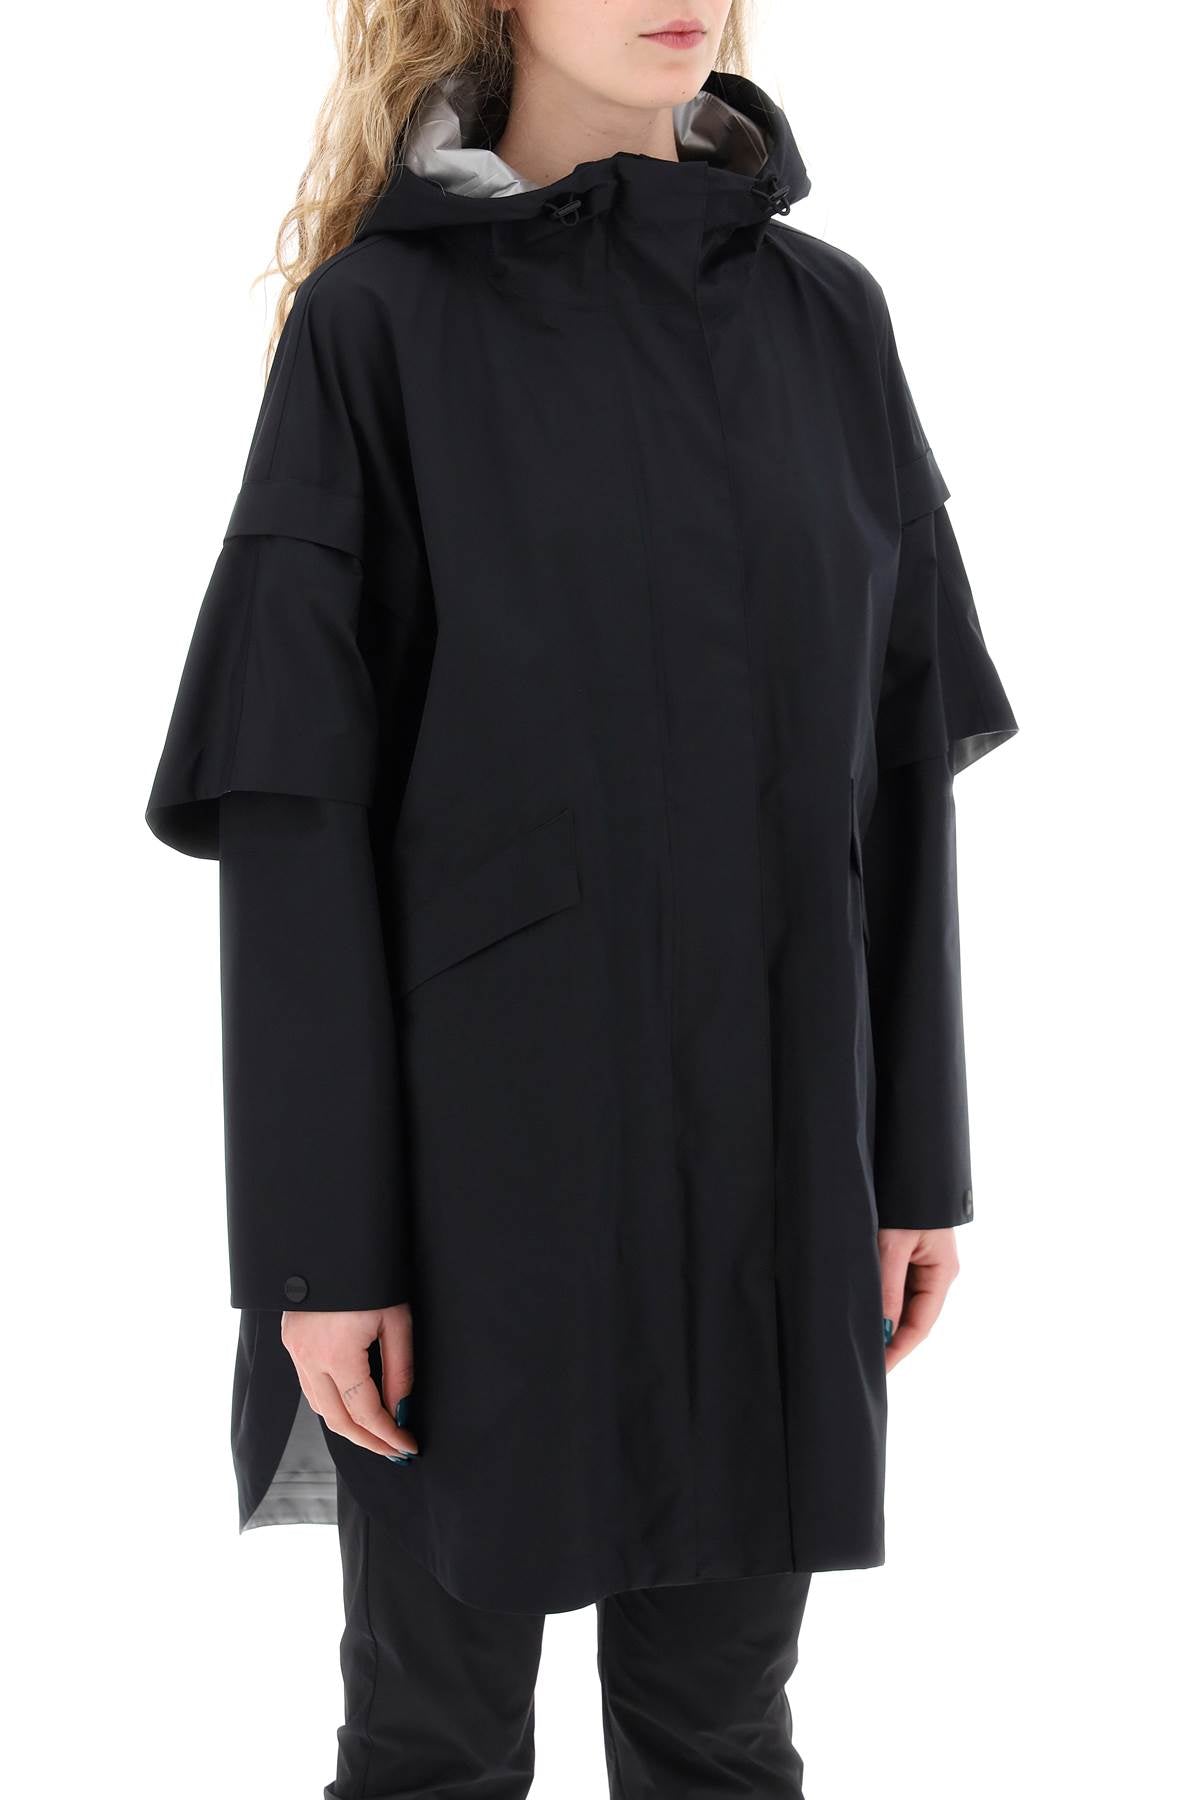 Herno laminar "removable sleeve cape coat-1